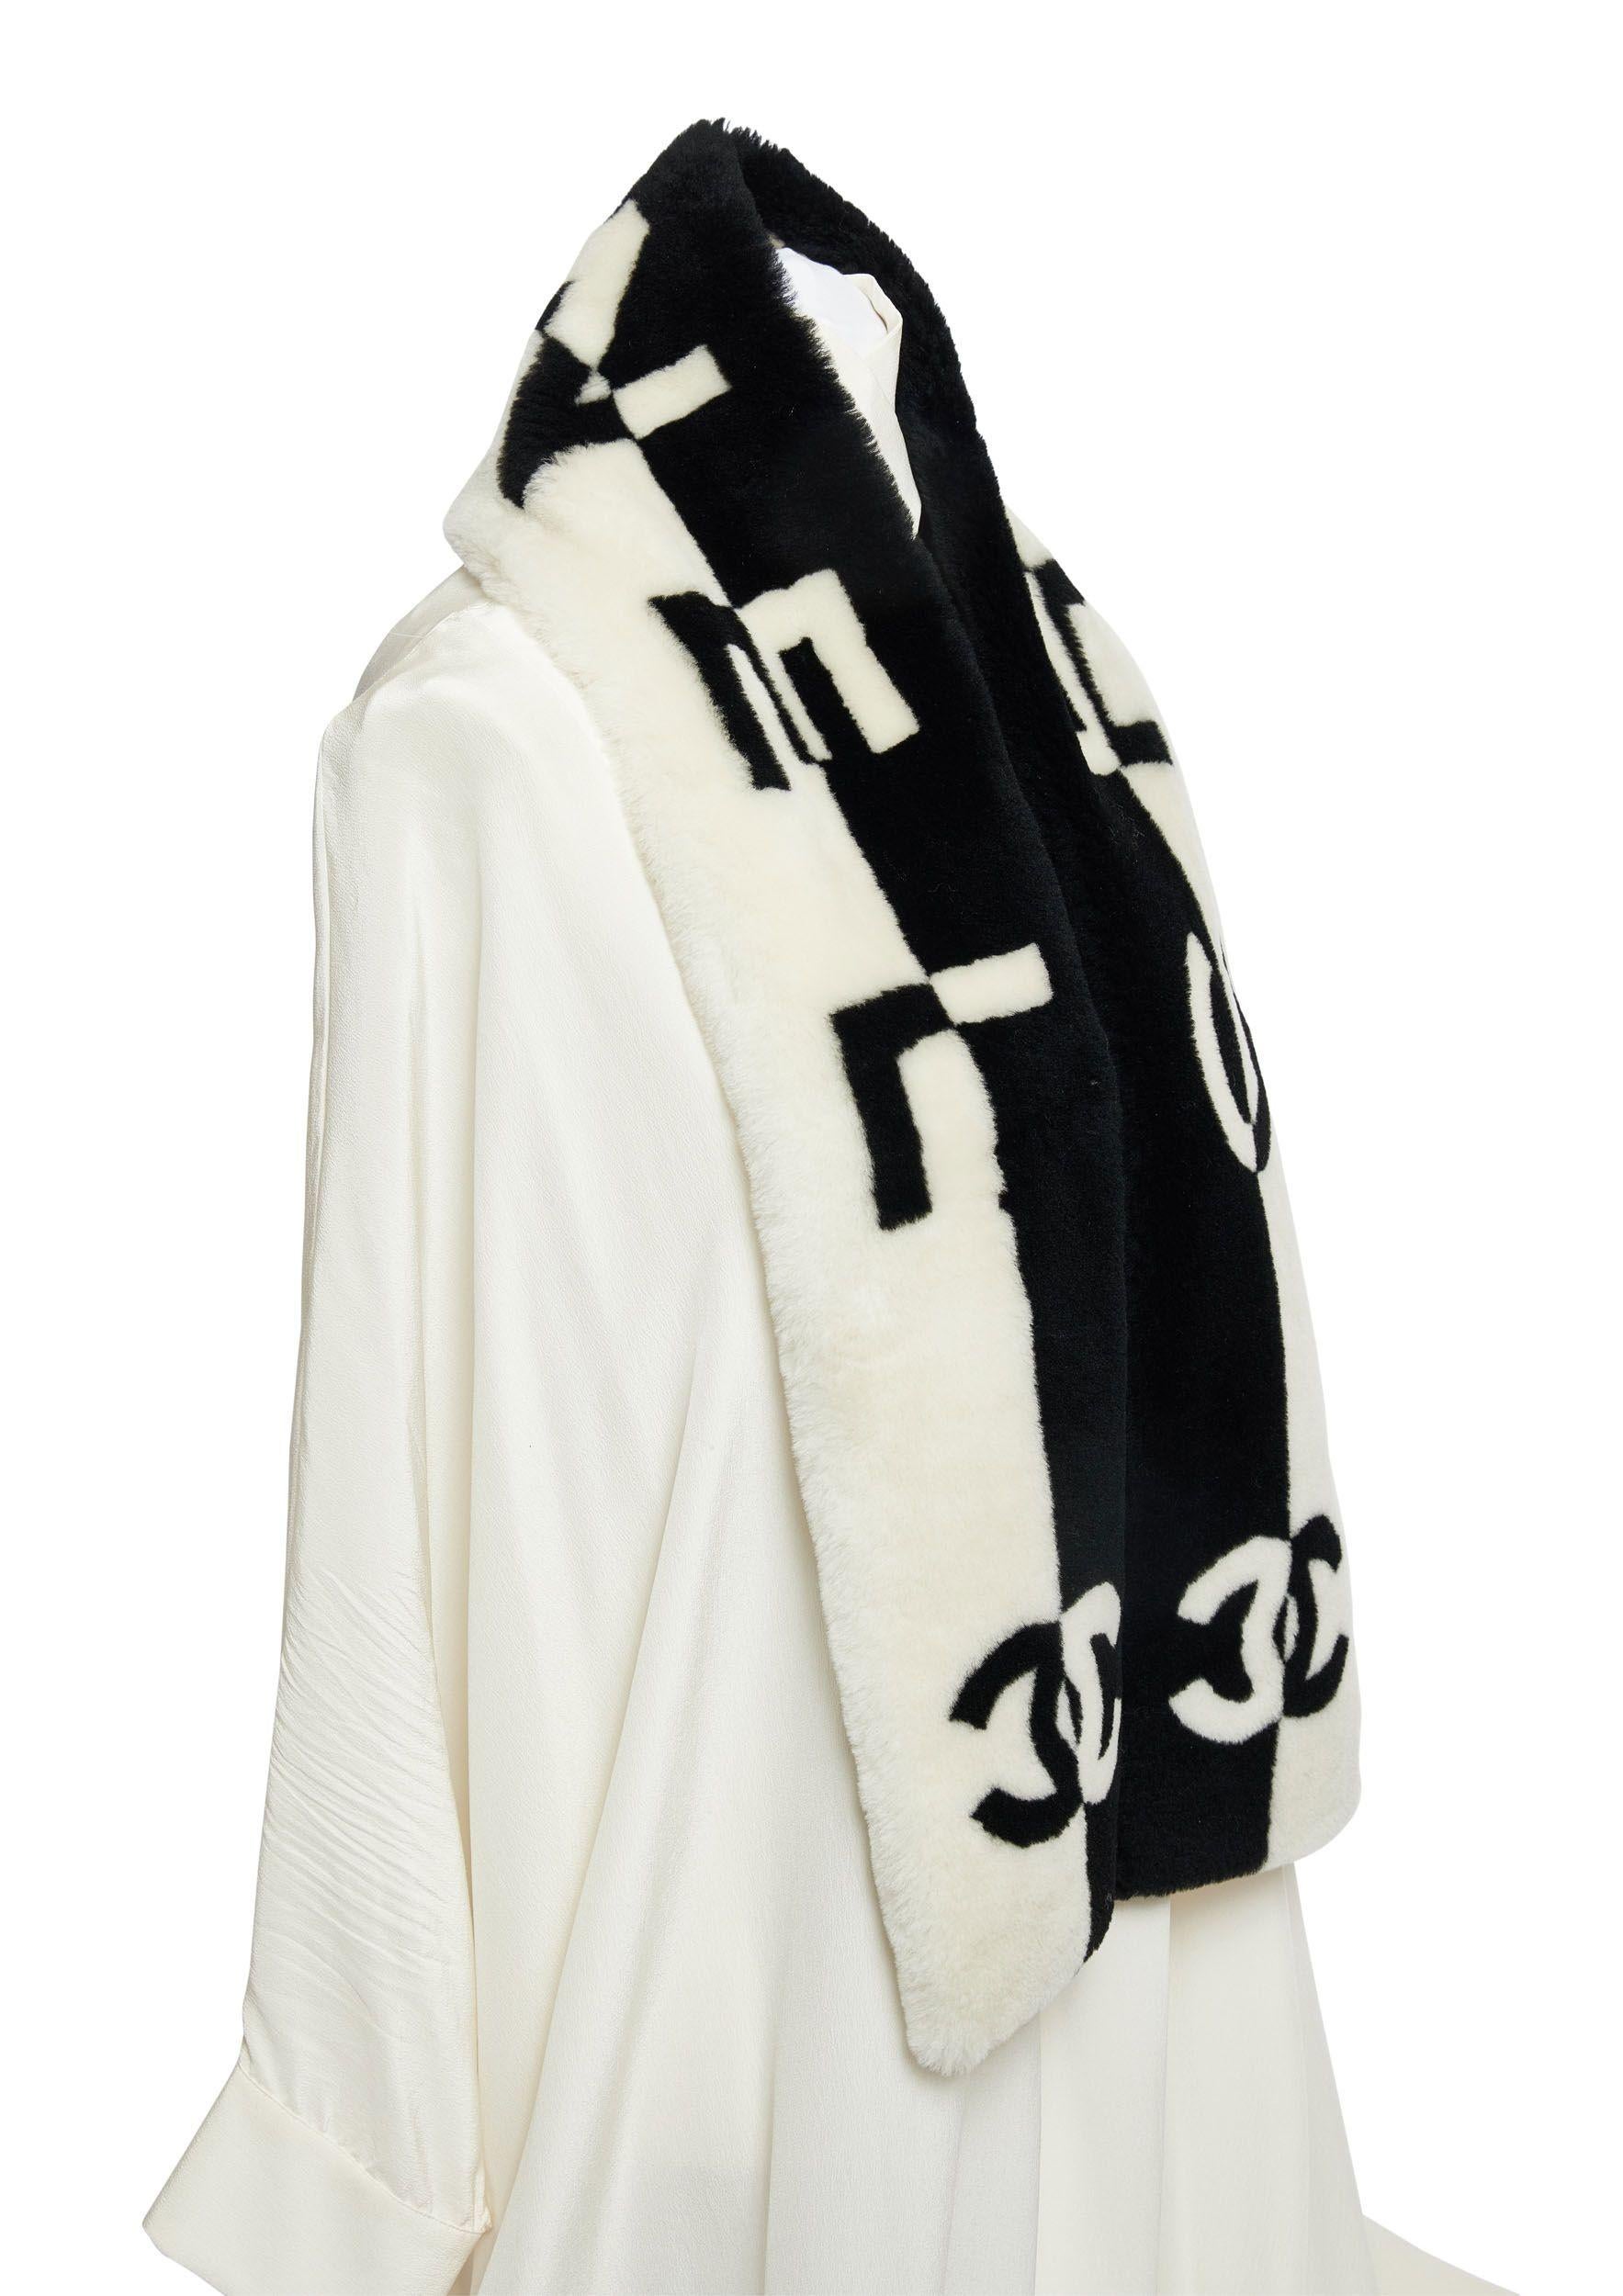 Chanel new black and white sheepskin scarf with black and white Chanel letters and CC logo in contrast.
Cashmere lining.